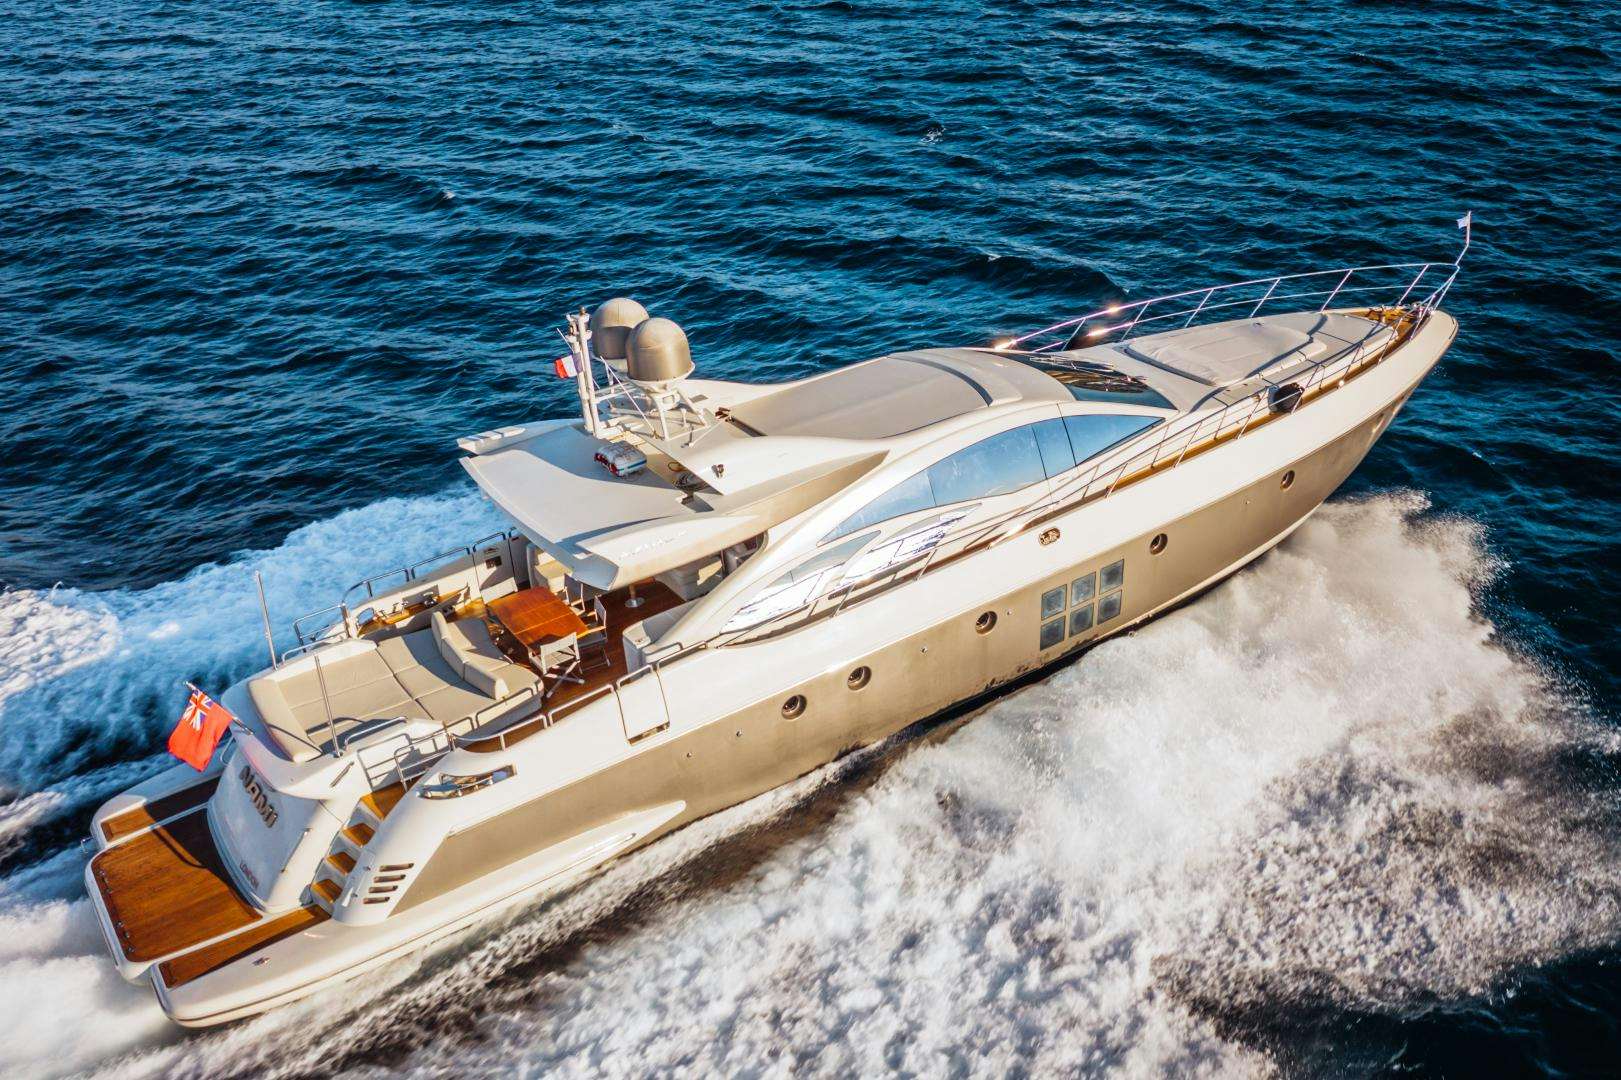 Nami
Yacht for Sale